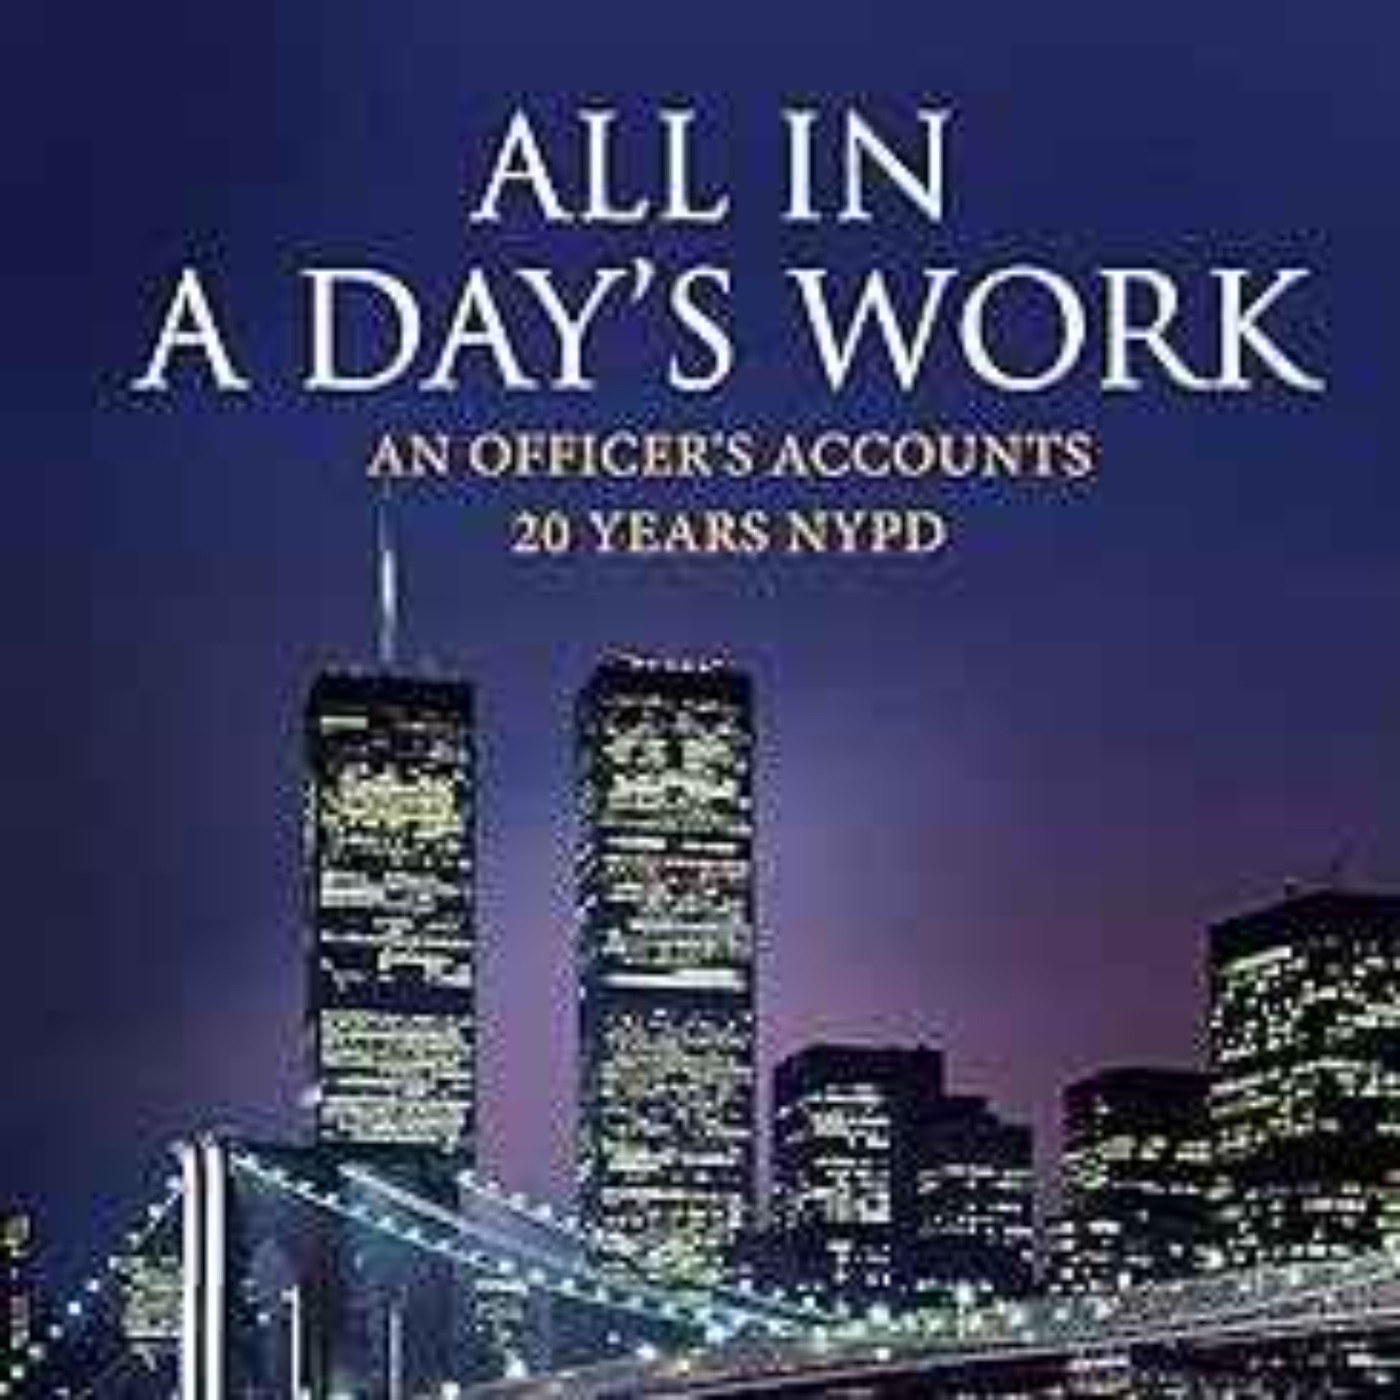 John Ferriso - All in a day's work: An officer's accounts 20 years NYPD